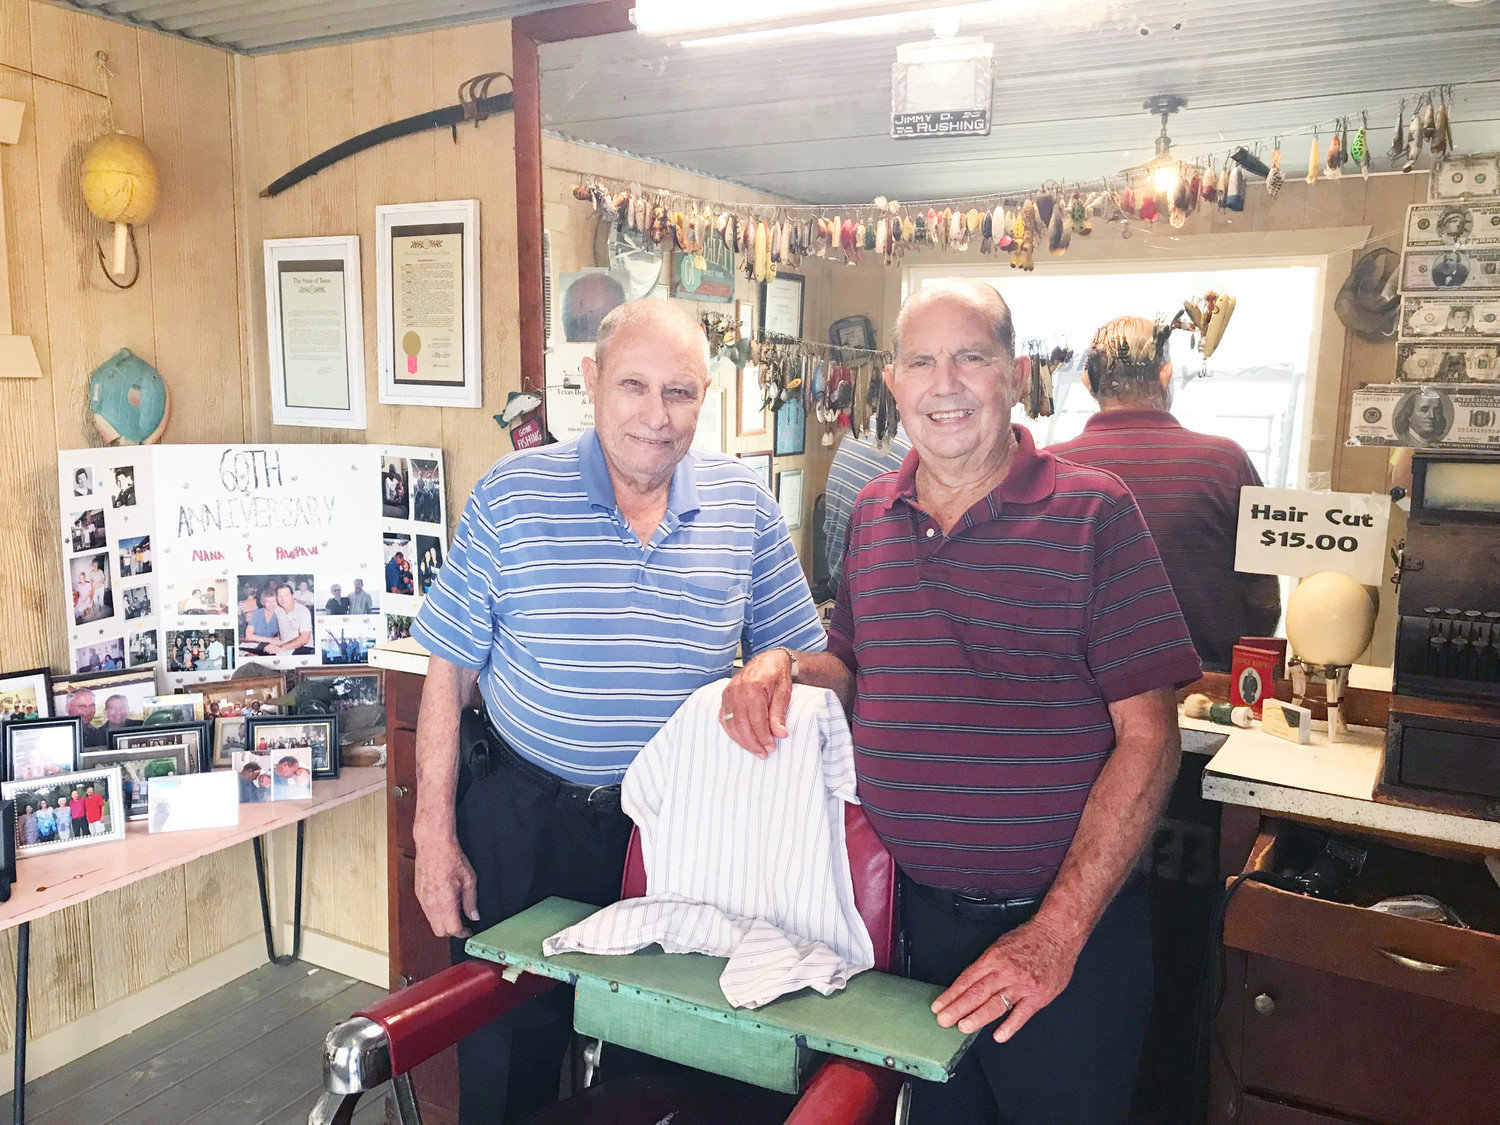 Jimmy Rushing, right, and longtime friend Jerry Rapp stand inside the new Broadway Barber Shop exhibit behind the Mineola Historical Museum. Rushing, who retired earlier this year, donated the contents of his barber shop to the museum. The exhibit replicates Rushing’s shop, which he opened in 1961, when he sold haircuts for 50 cents. It features an antique Belmont barber chair, old barbering equipment, walls full of memorabilia, an antique cash register, an old-time fishing lure collection, a shoe shine station, and many other items of historical note. The exhibit was formally opened with a ribbon-cutting and an open house at the museum on Saturday, Sept. 22. (Monitor photo by Hank Murphy).